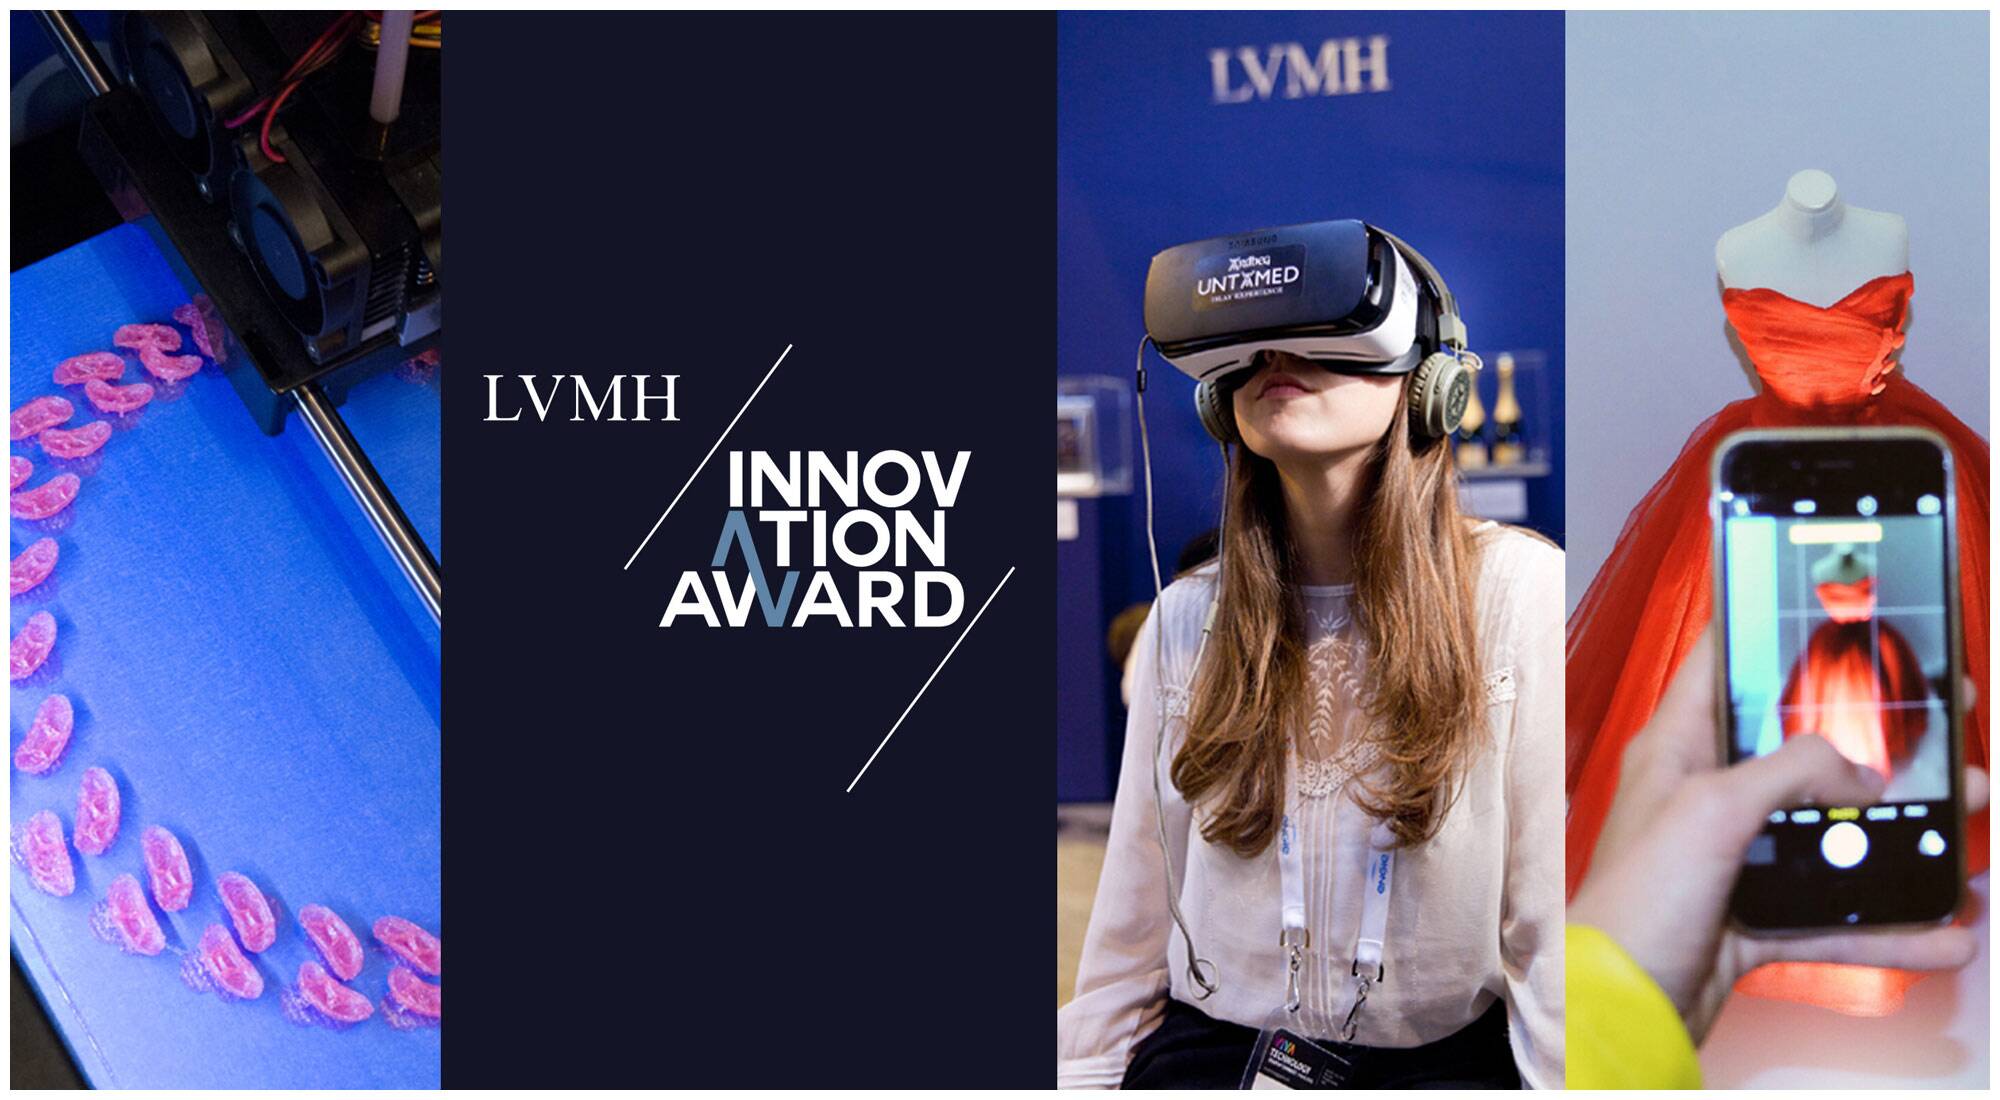 LVMH Innovation Award 2022  Startups, are you ready to Tech Part